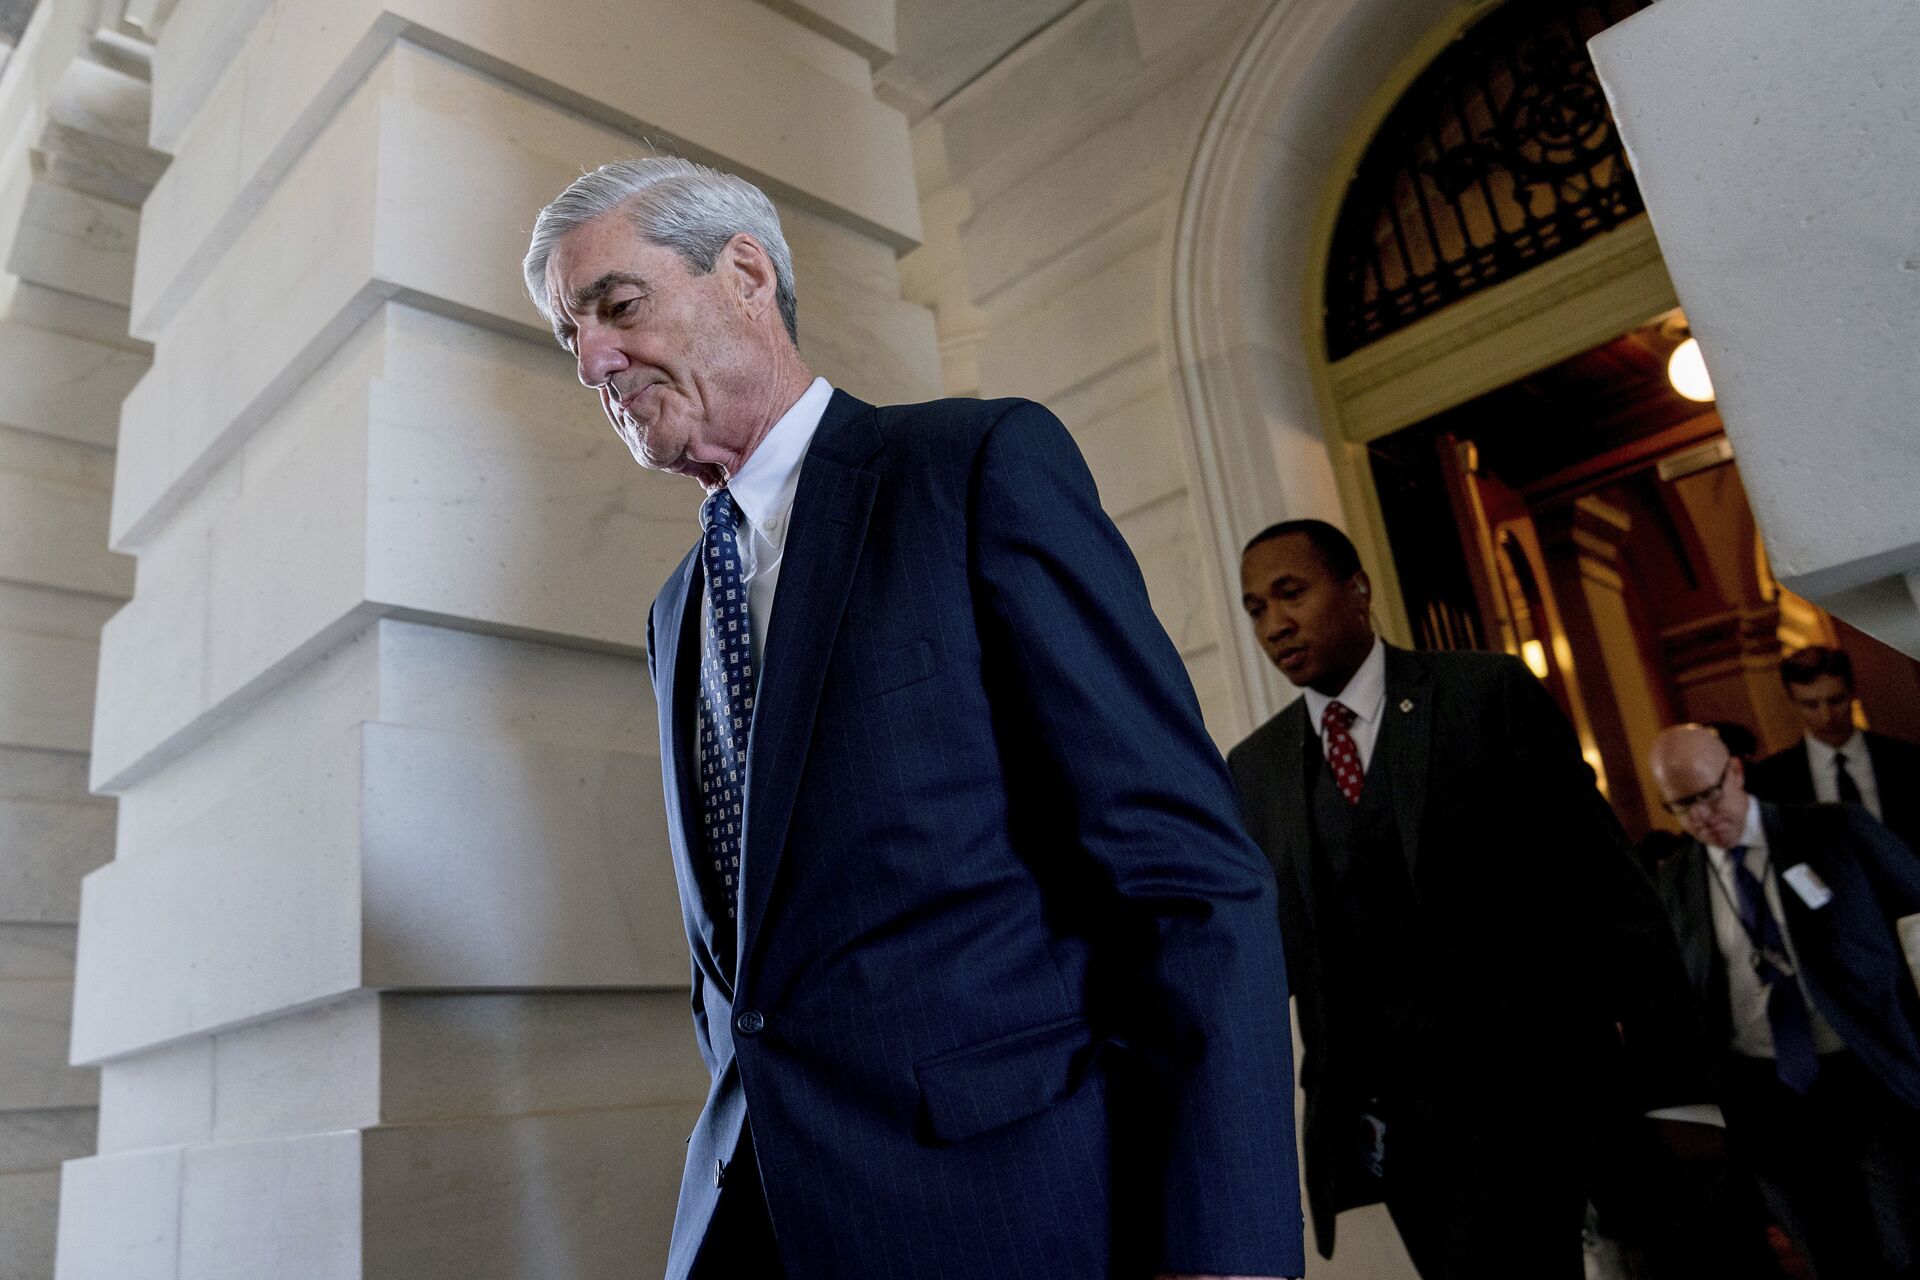 Former FBI Director Robert Mueller, the special counsel probing Russian interference in the 2016 election, departs Capitol Hill following a closed door meeting in Washington. (File) - Sputnik International, 1920, 16.09.2021